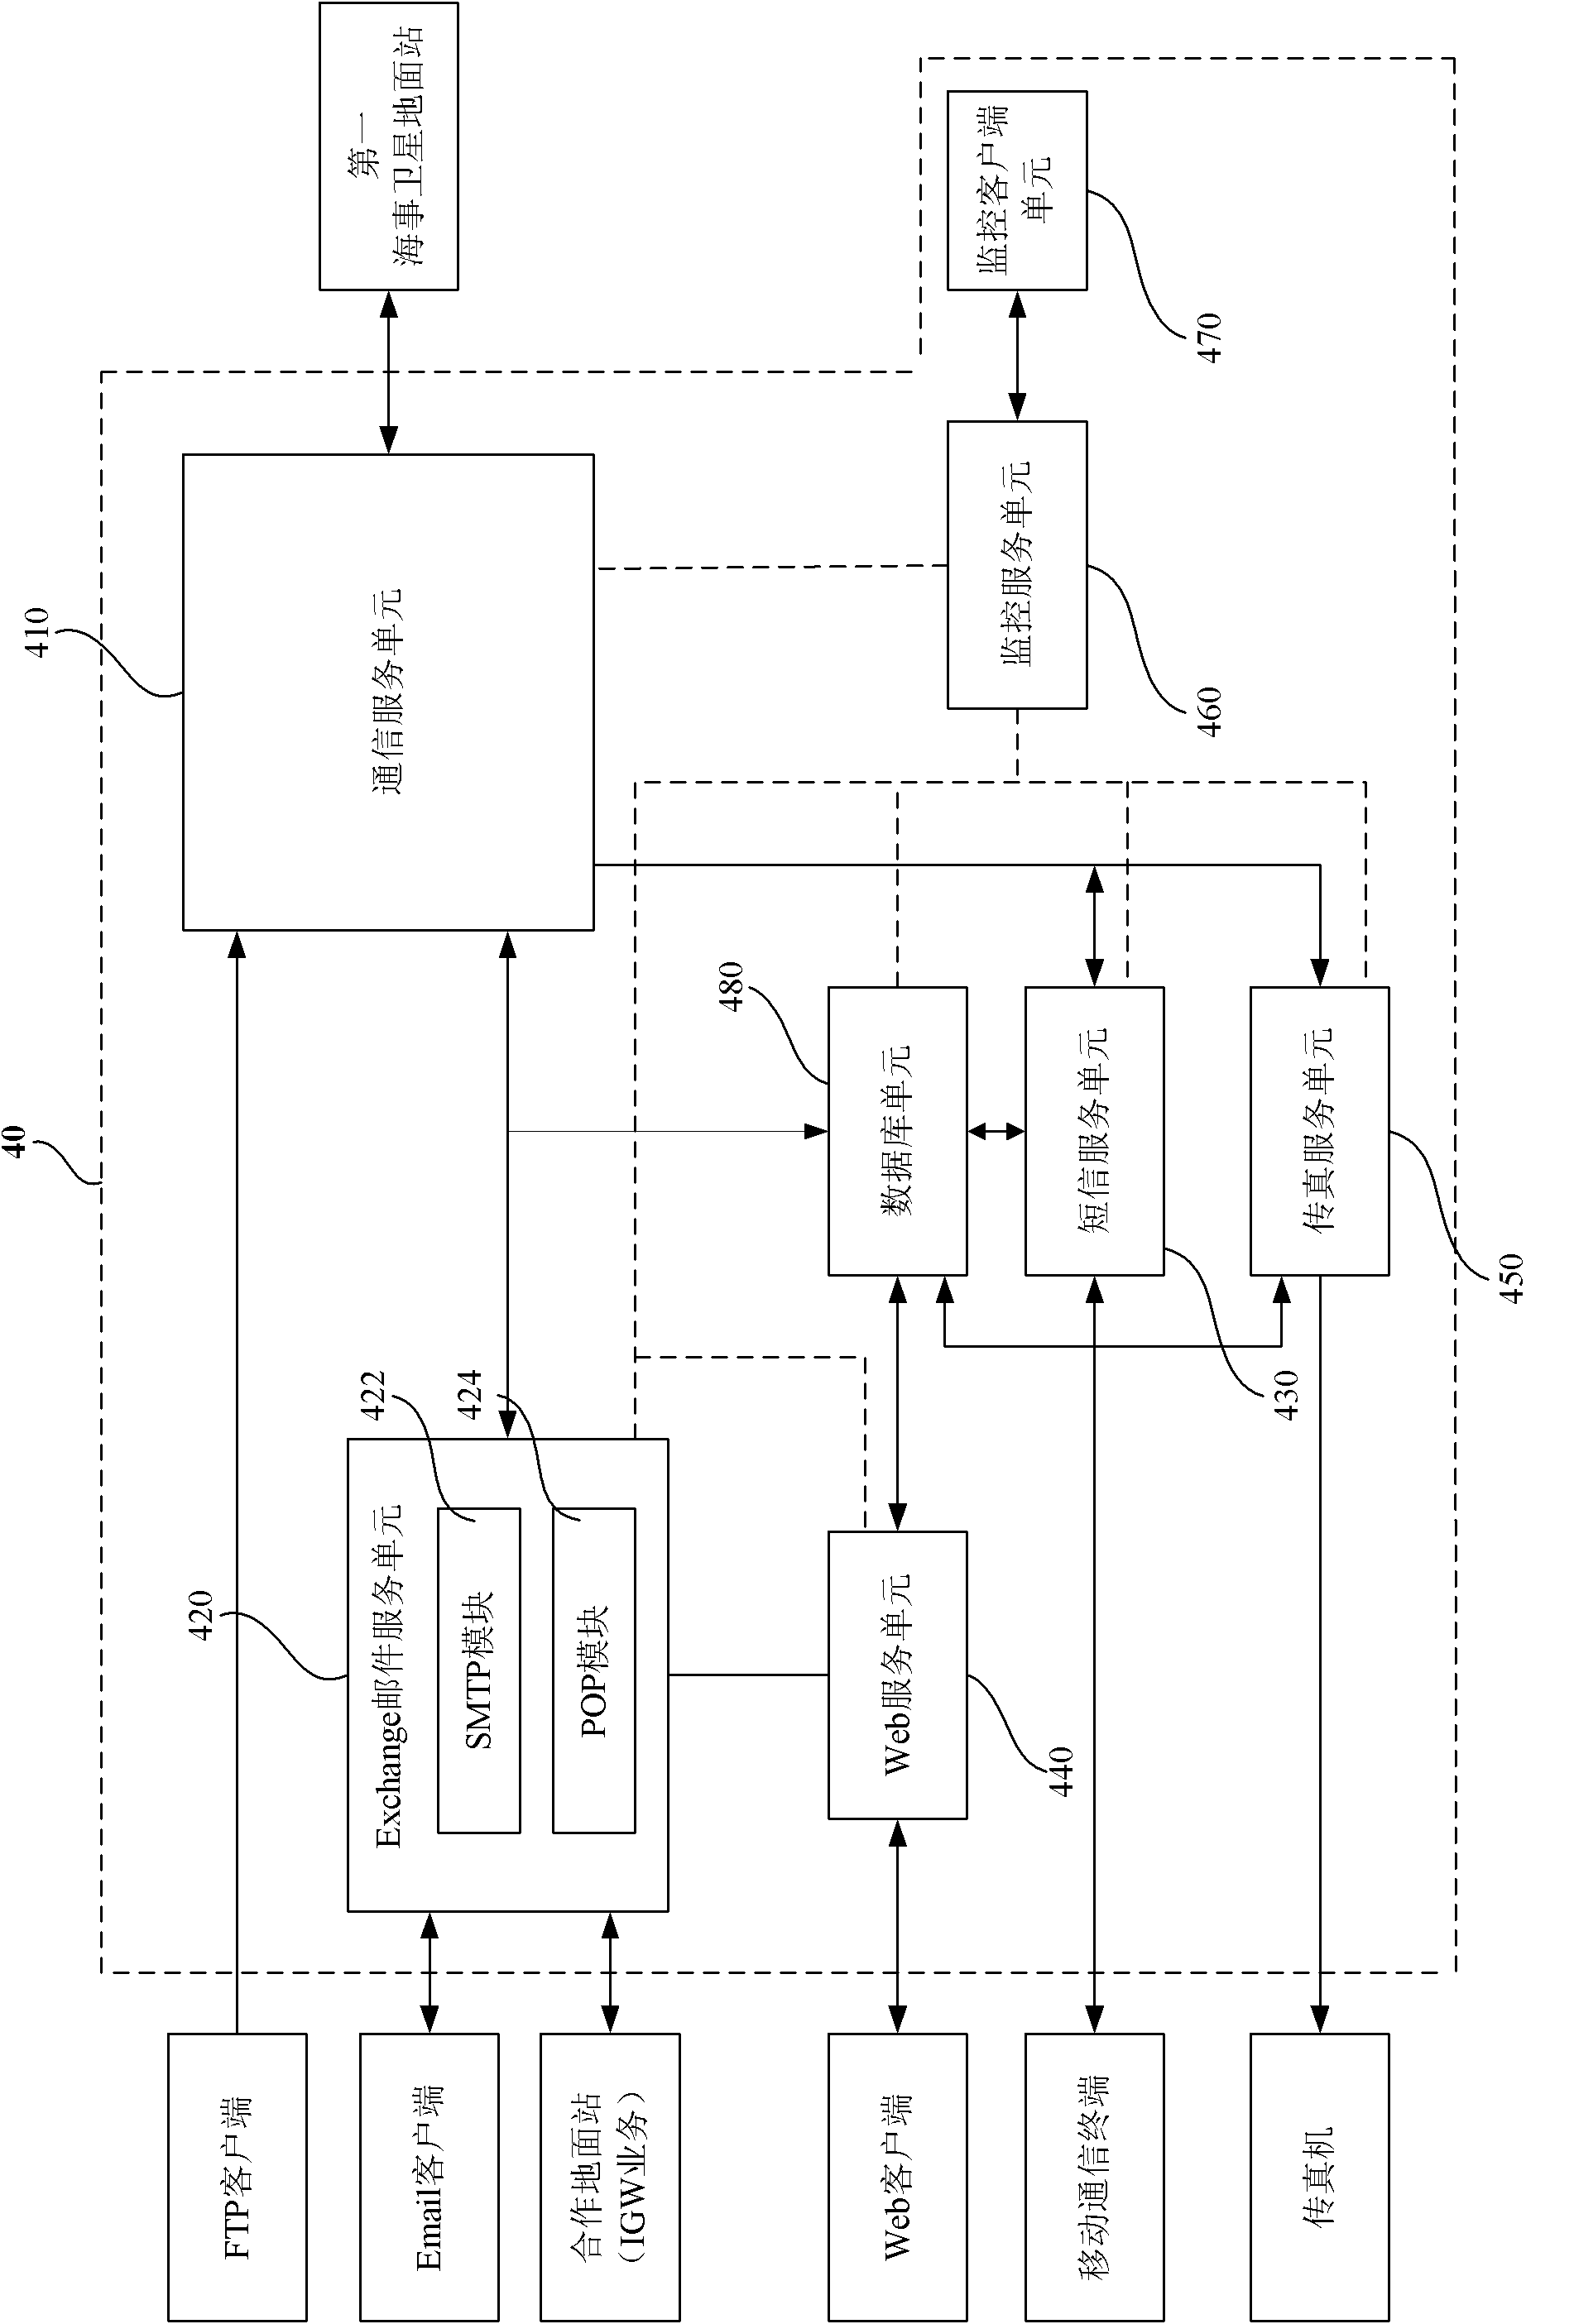 Satellite short-data communication method, device and system between ship and shore